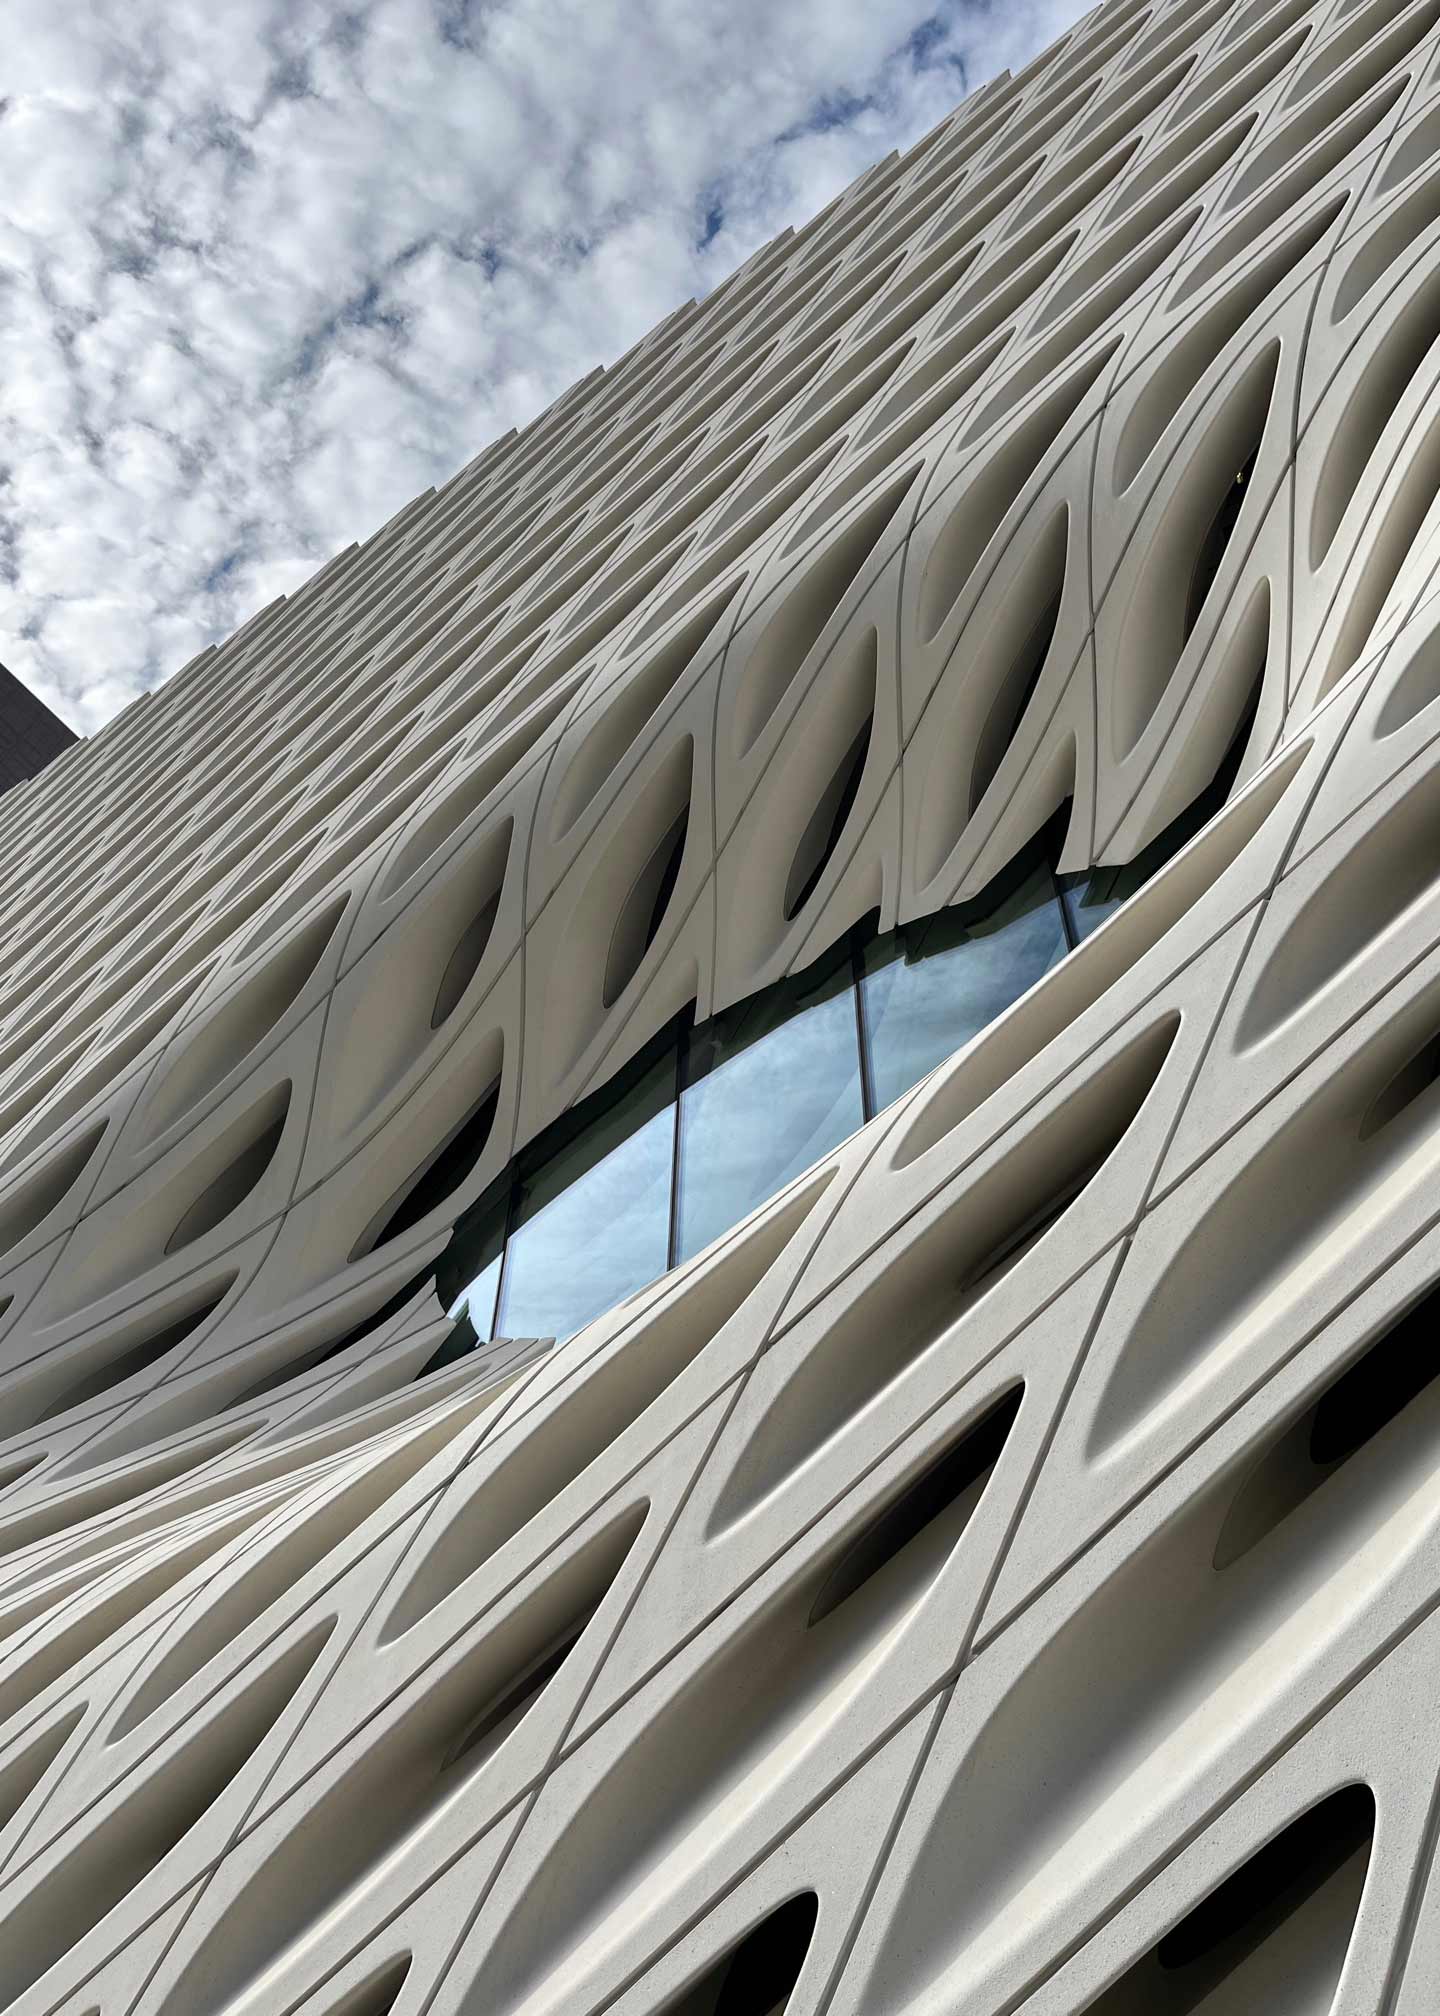 Don't forget to visit the Broad Museum in Downtown L.A.